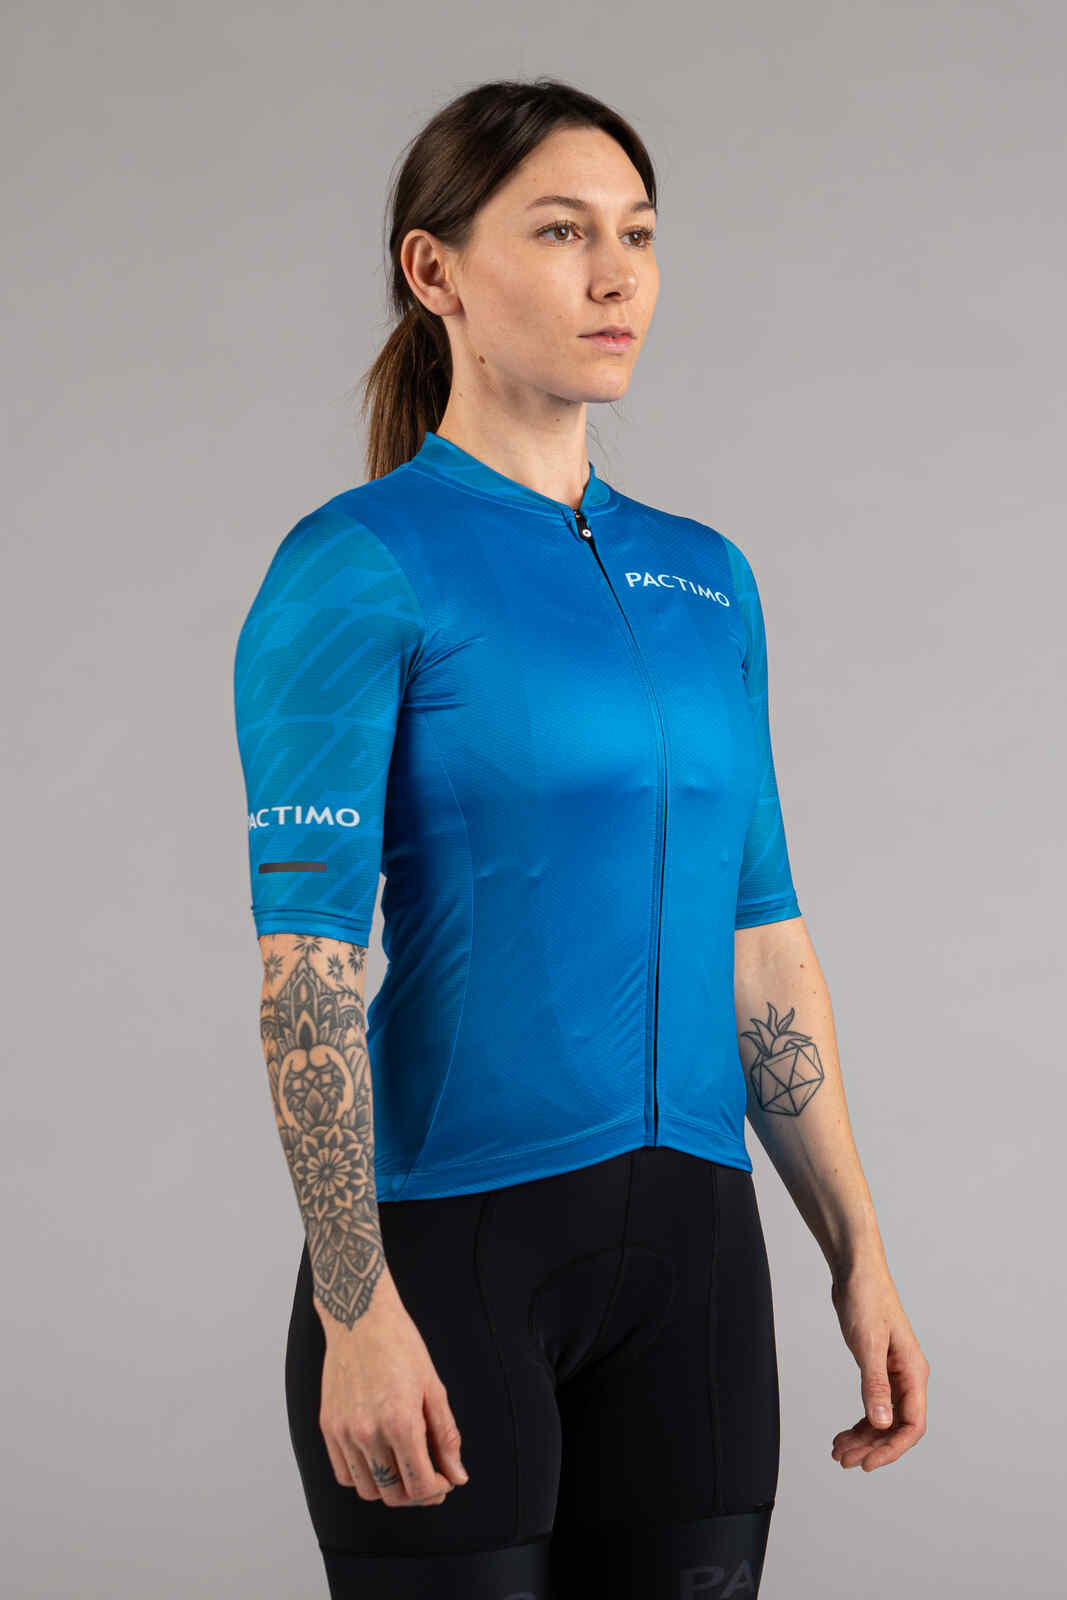 Women's Blue Ascent Aero Cycling Jersey - Front View